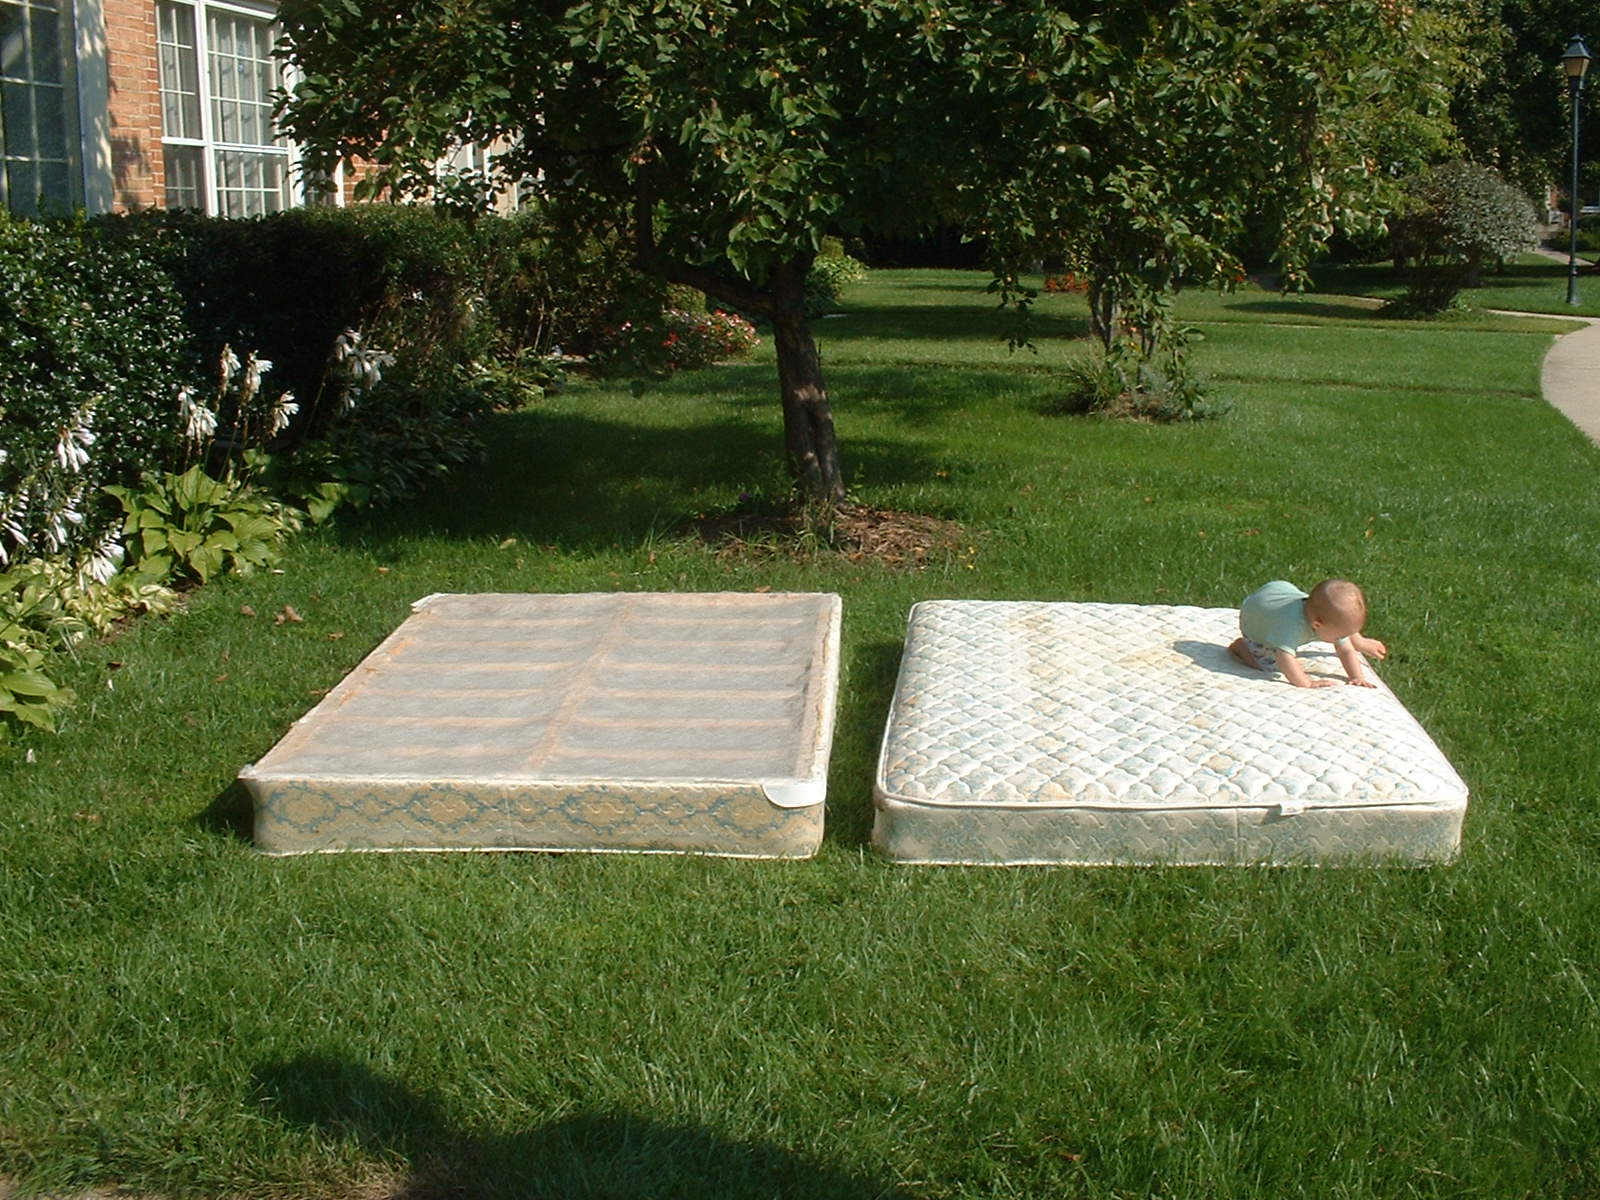 Taking apart an old mattress and box spring on my front lawn